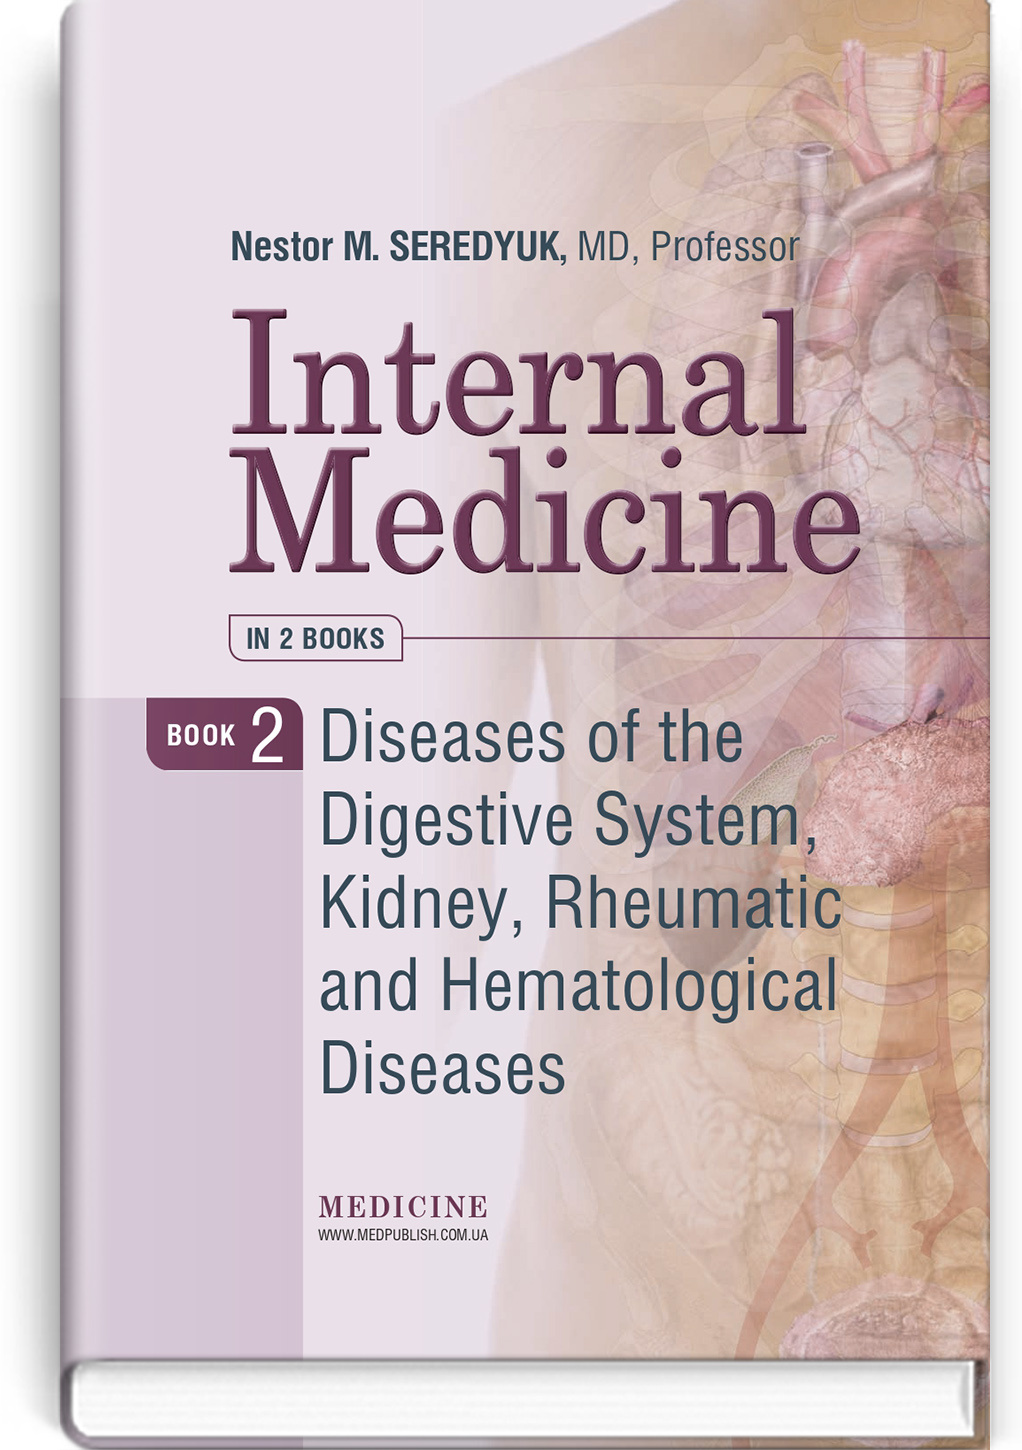 Internal Medicine: in 2 books. Book 2. Diseases of the Digestive System, Kidney, Rheumatic and Hematological Diseases: textbook